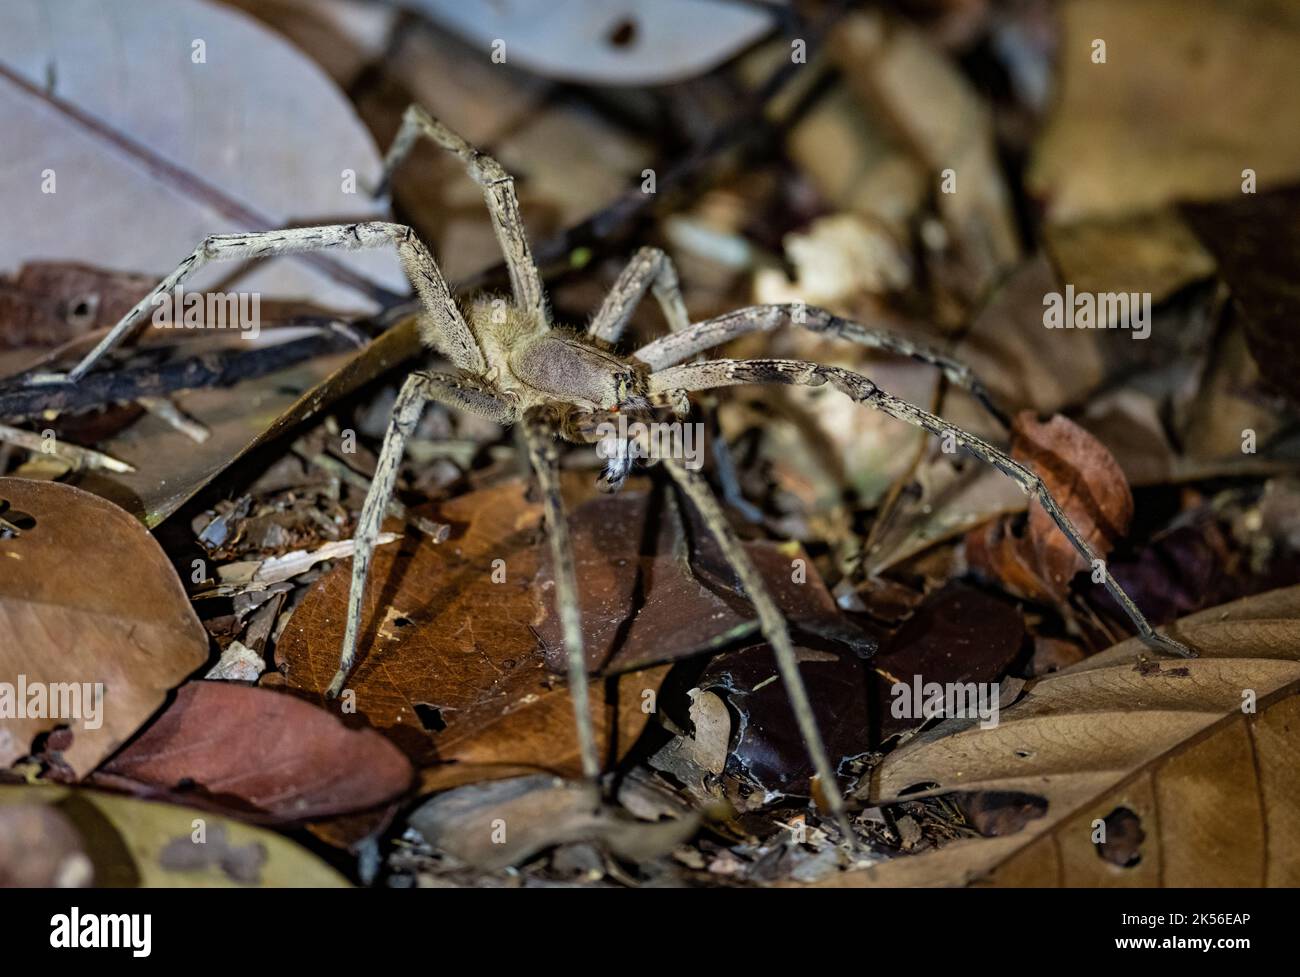 A large Brazilian wandering spider (Phoneutria sp.) on leaf litters of forest floor. Amazonas, Brazil. Stock Photo